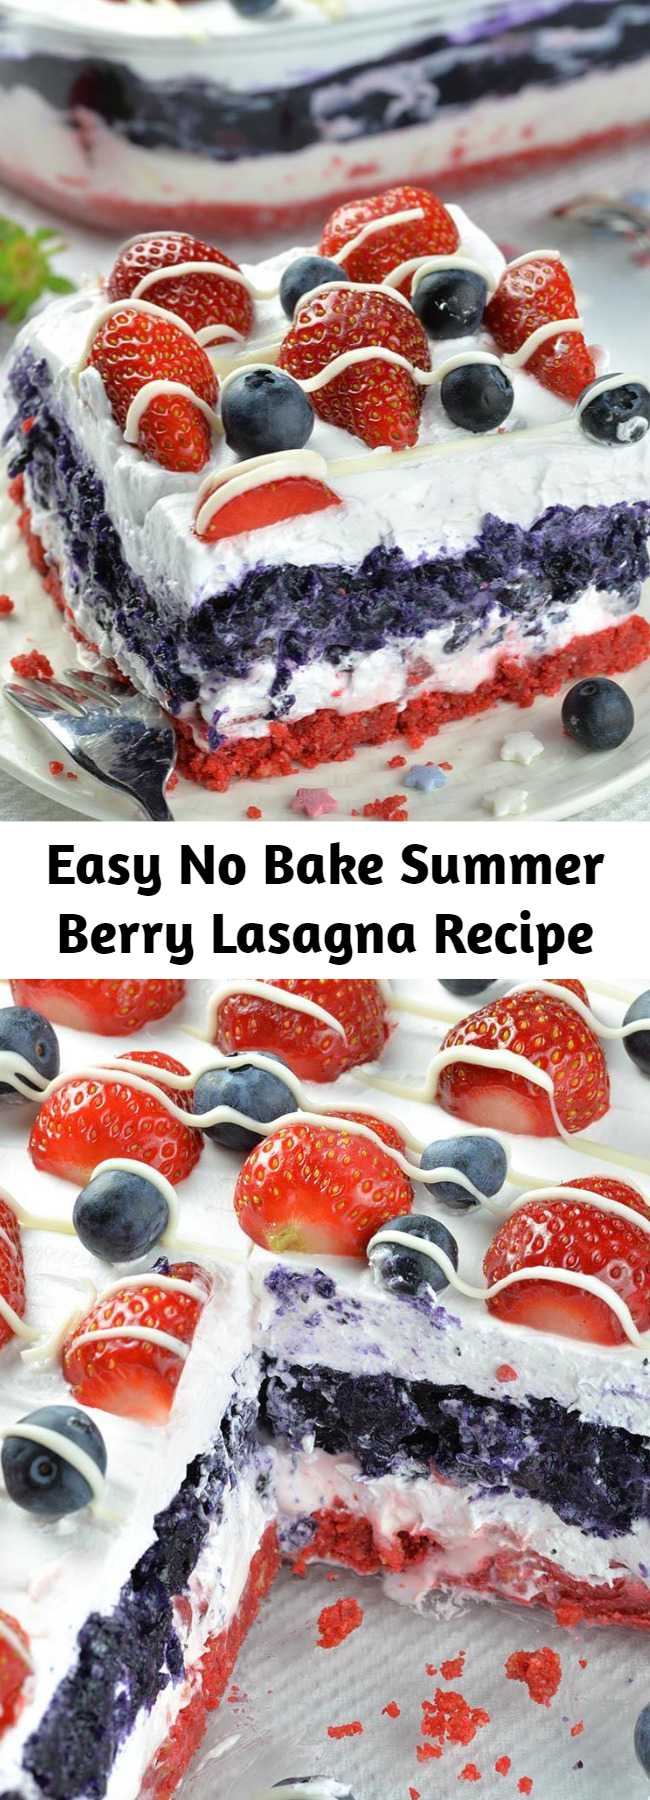 Easy No Bake Summer Berry Lasagna Recipe - No Bake Summer Berry Lasagna is EASY SUMMER DESSERT RECIPE for refreshing sweet treat. This is perfect idea for Memorial Day and 4th of July dessert.